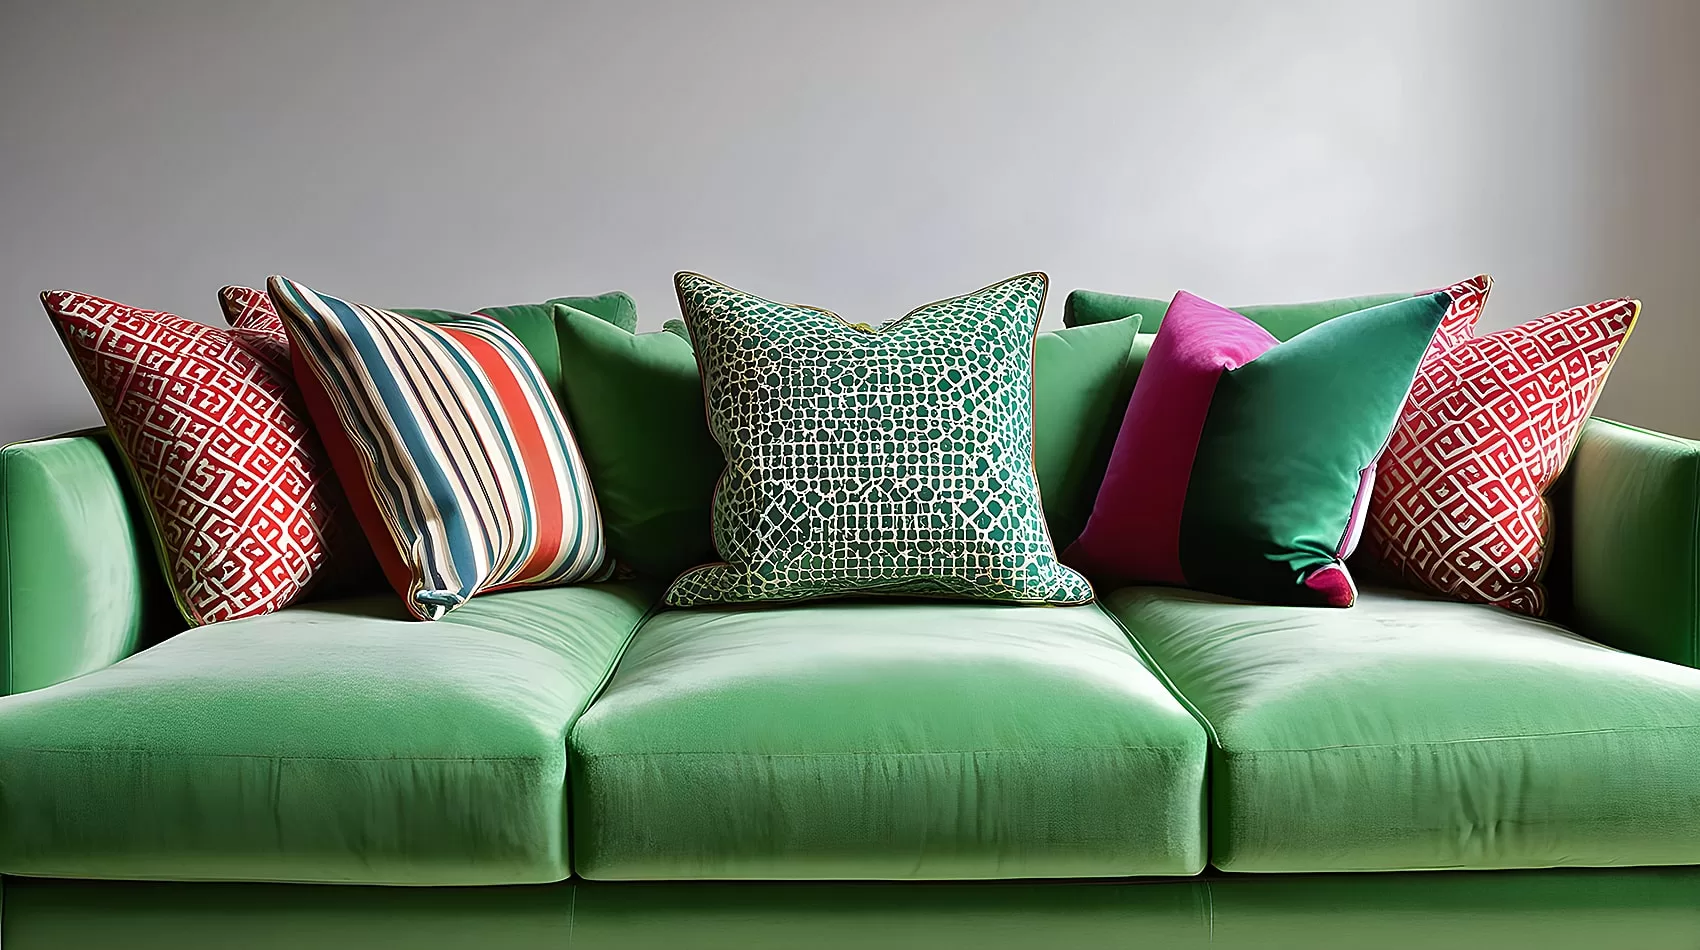 Green Couch Covers | Green Sofa Covers